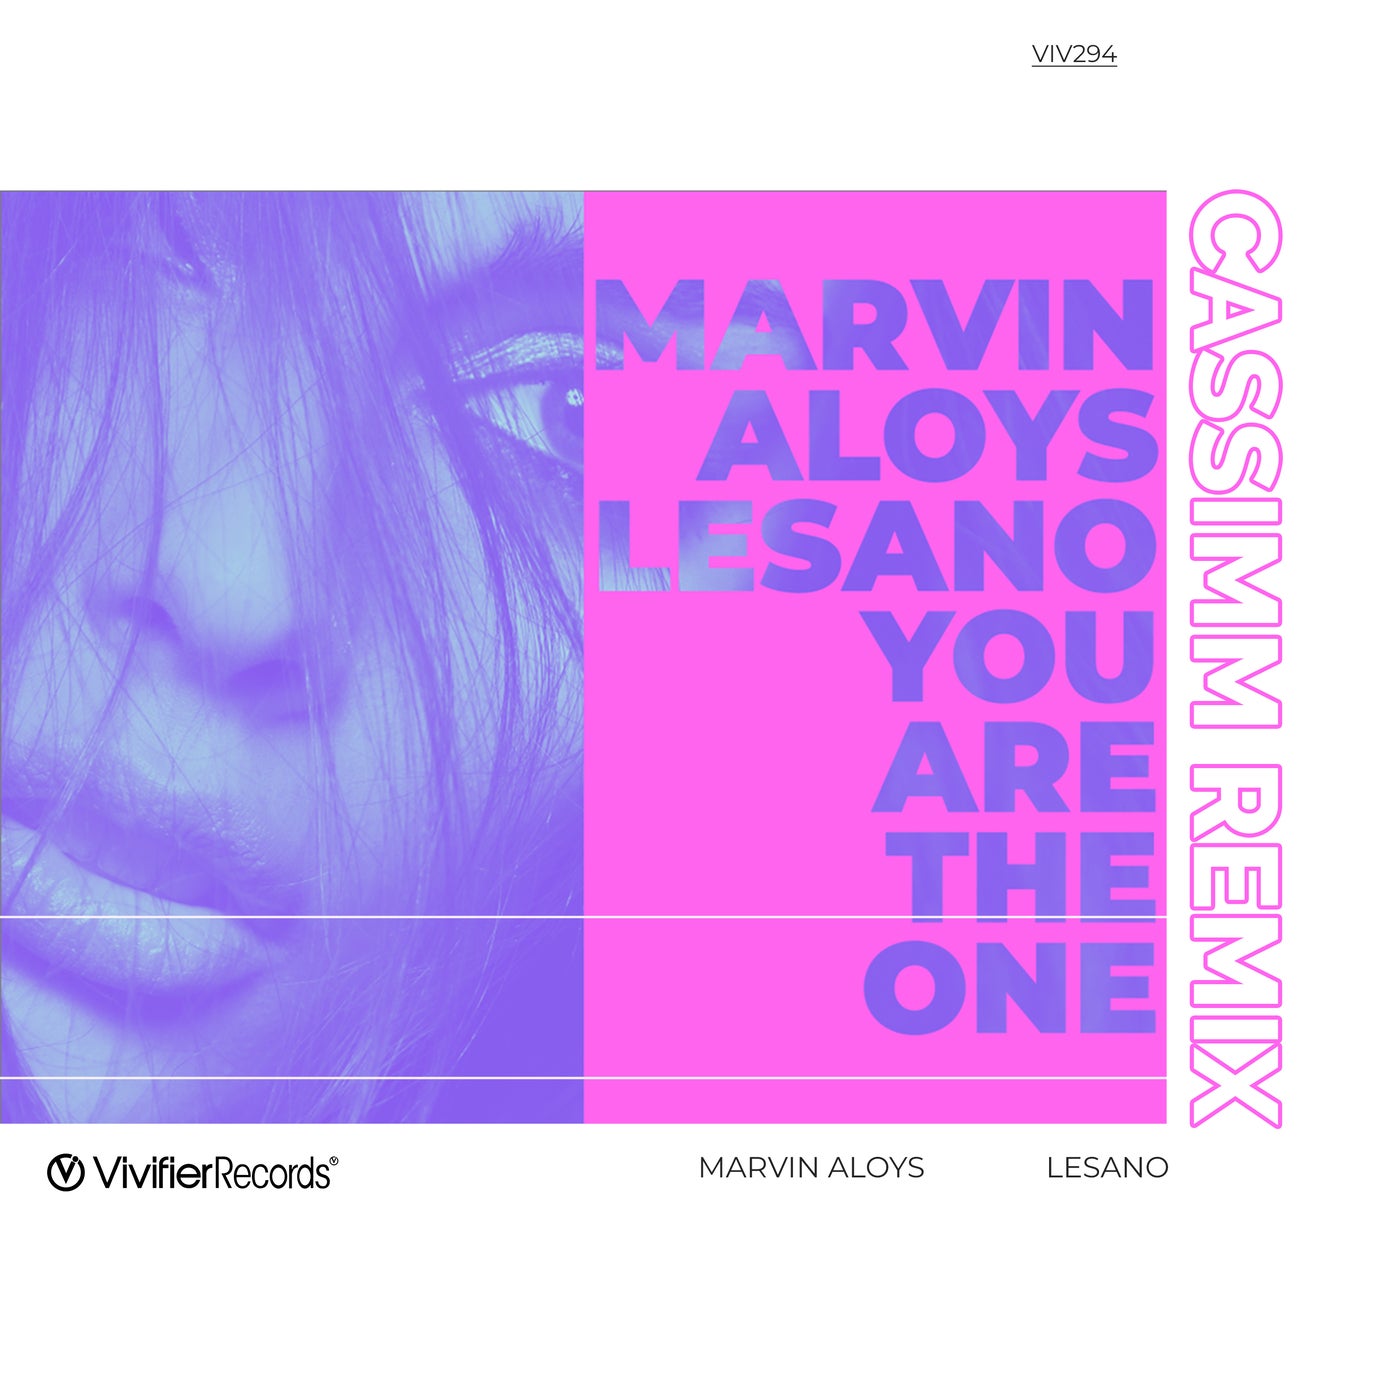 Marvin Aloys, CASSIMM, LeSano - You Are The One [VIV294]